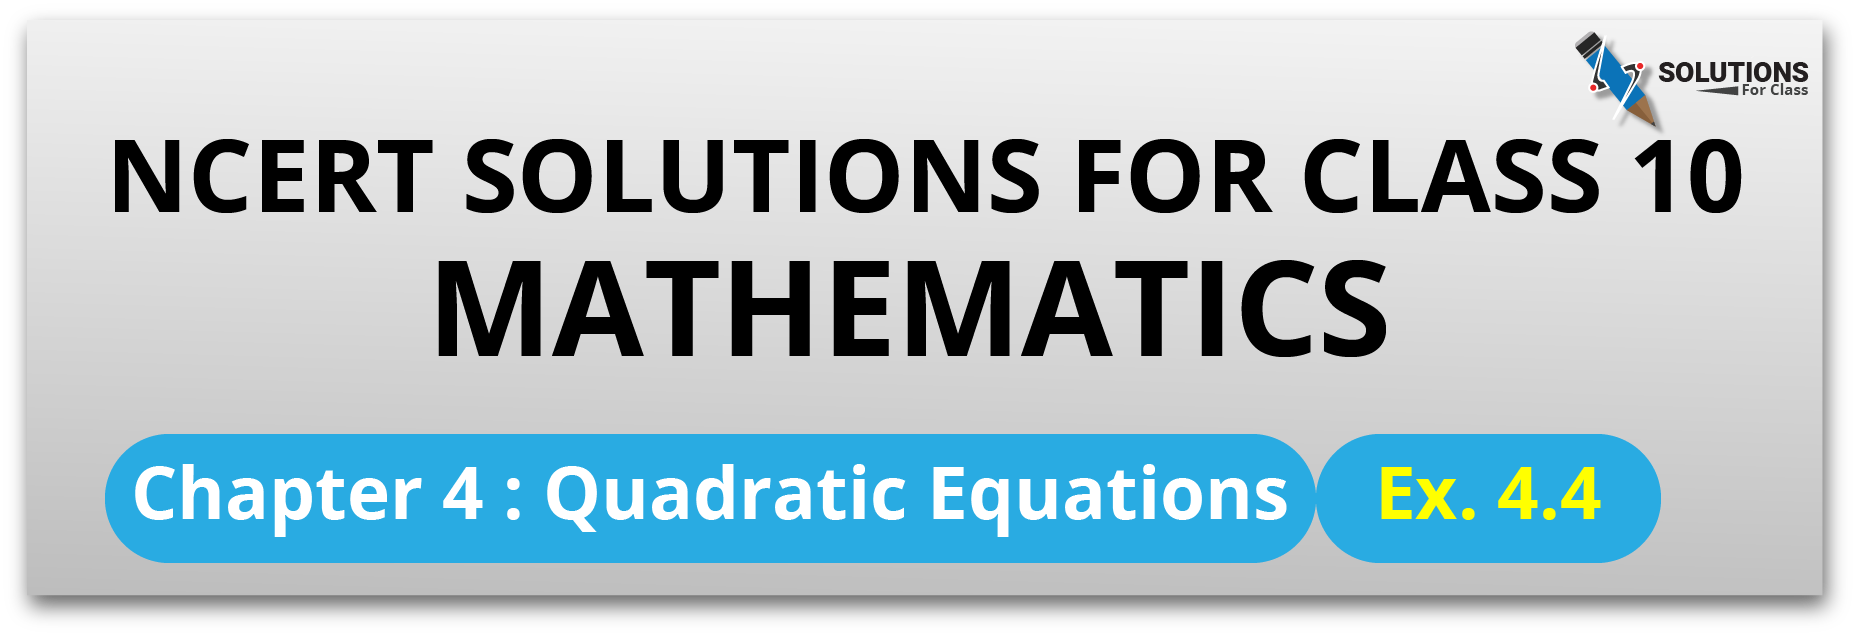 NCERT Solution For Class 10, Maths, Quadratic Equations, Exercise 4.4